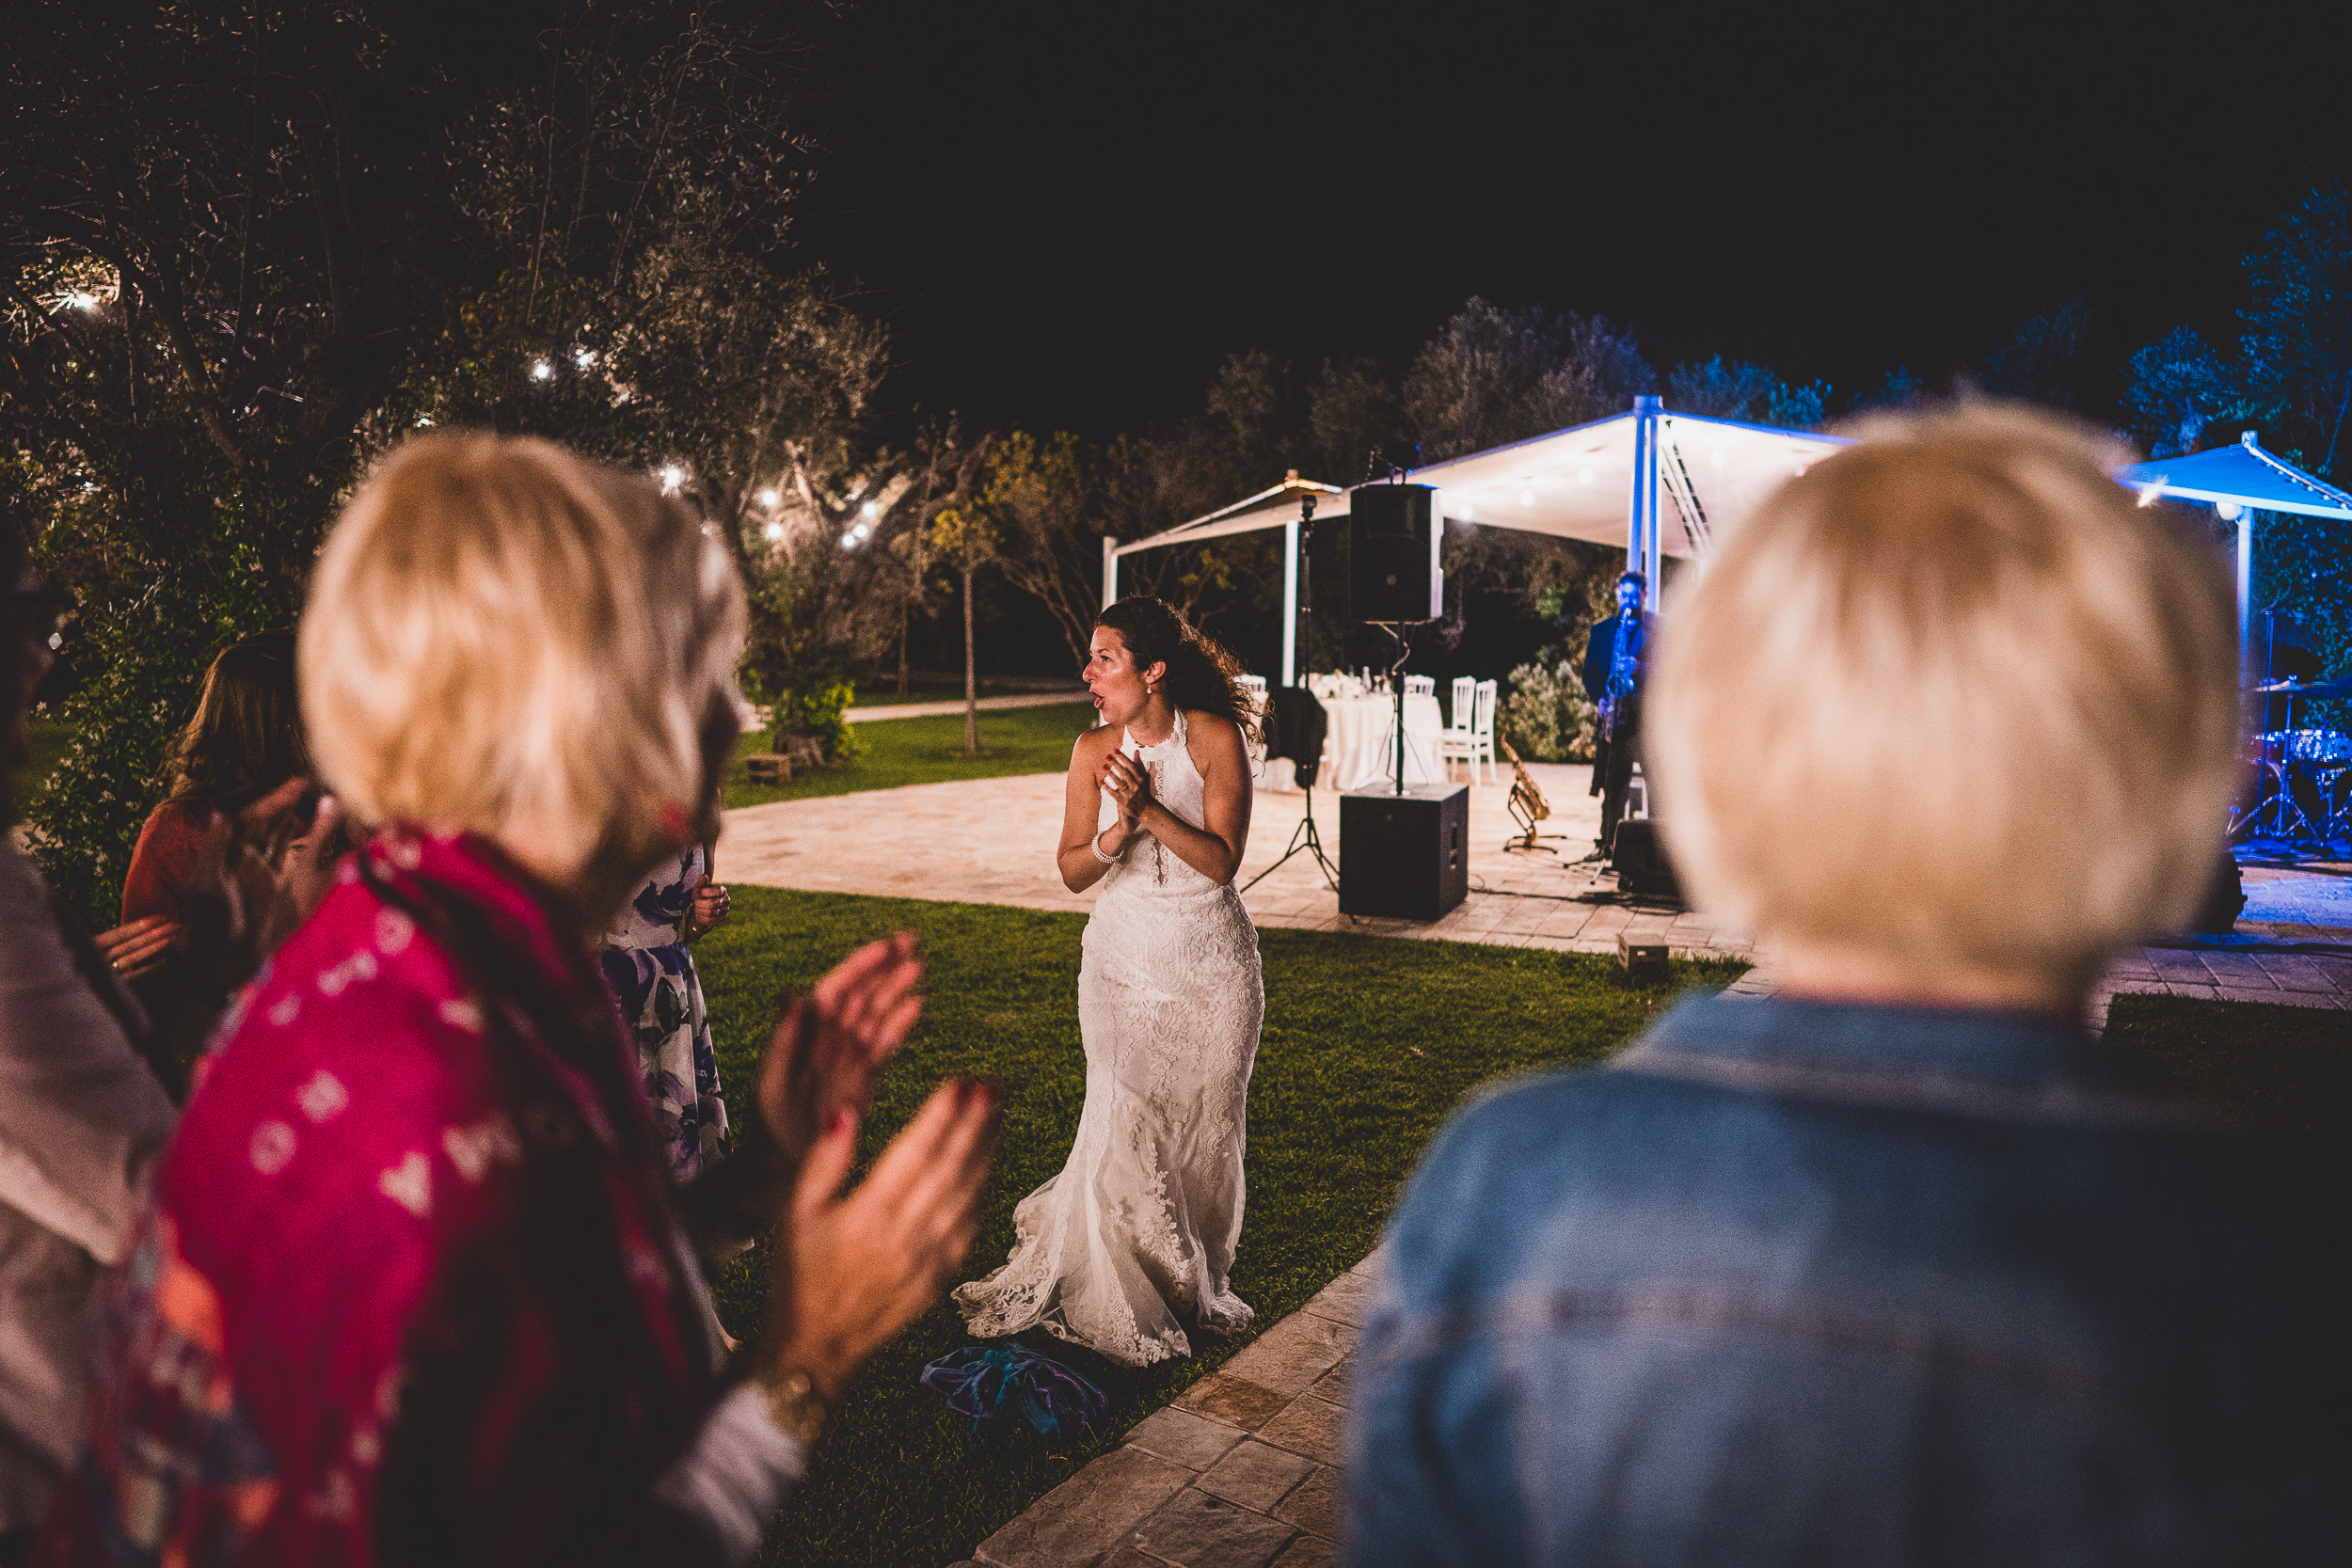 A bride clapping in front of a crowd at her wedding.